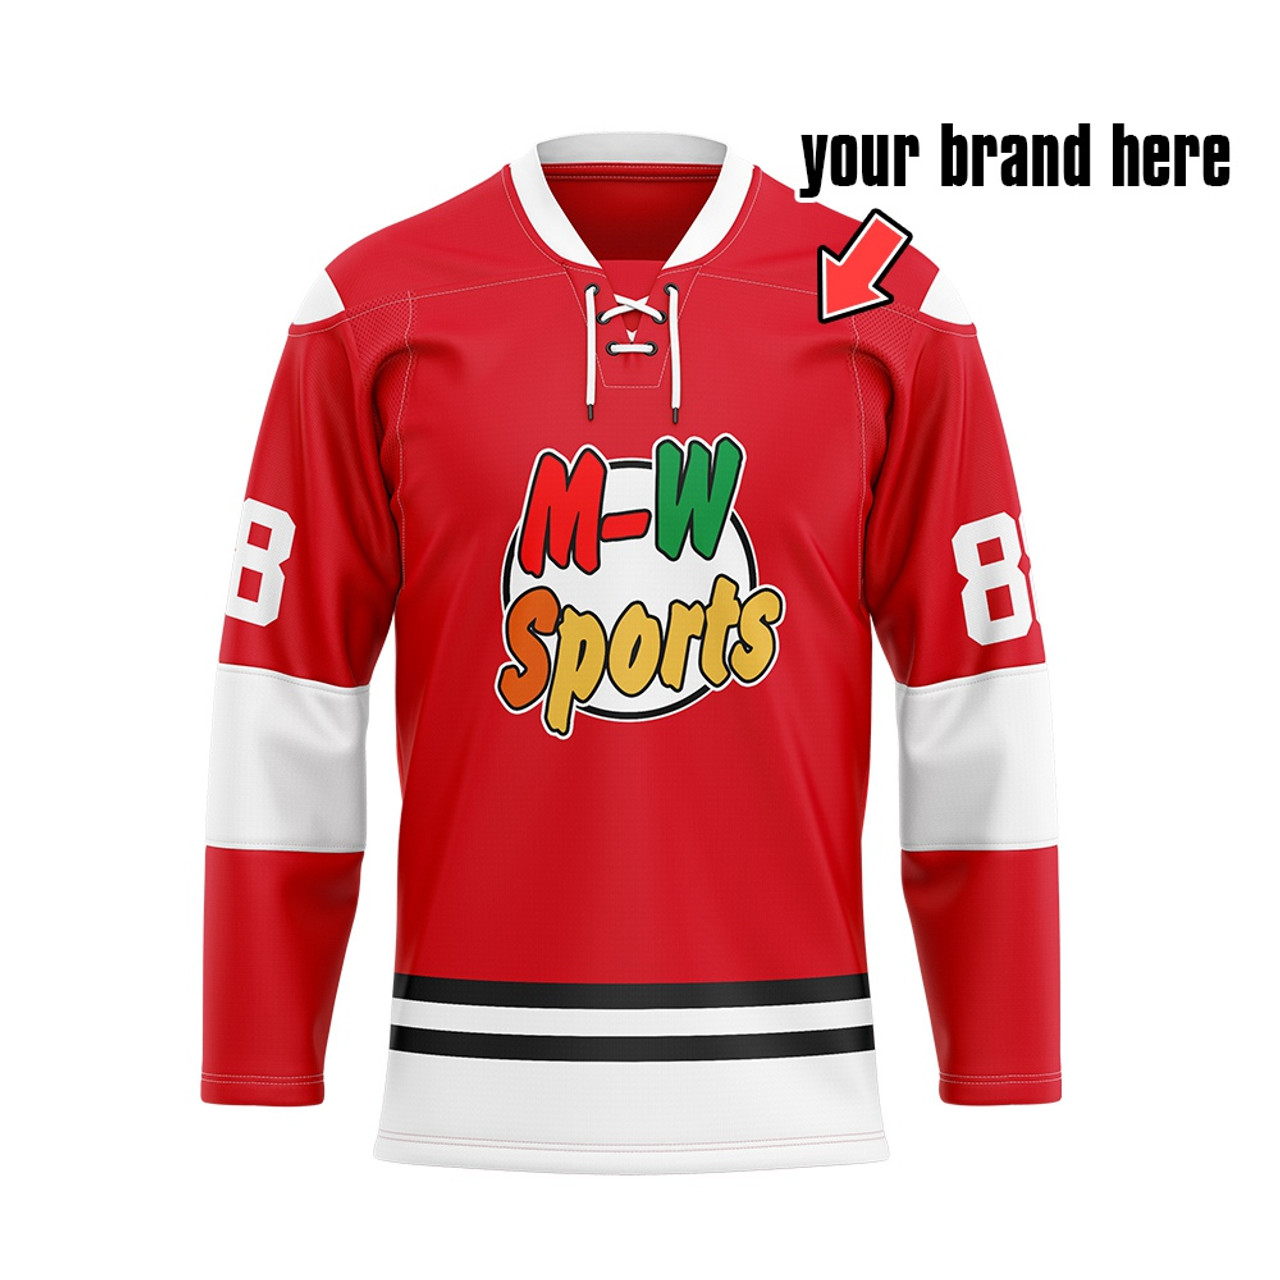 La Roche Red dye sublimated custom hockey jersey. You can customize with  your name and number!